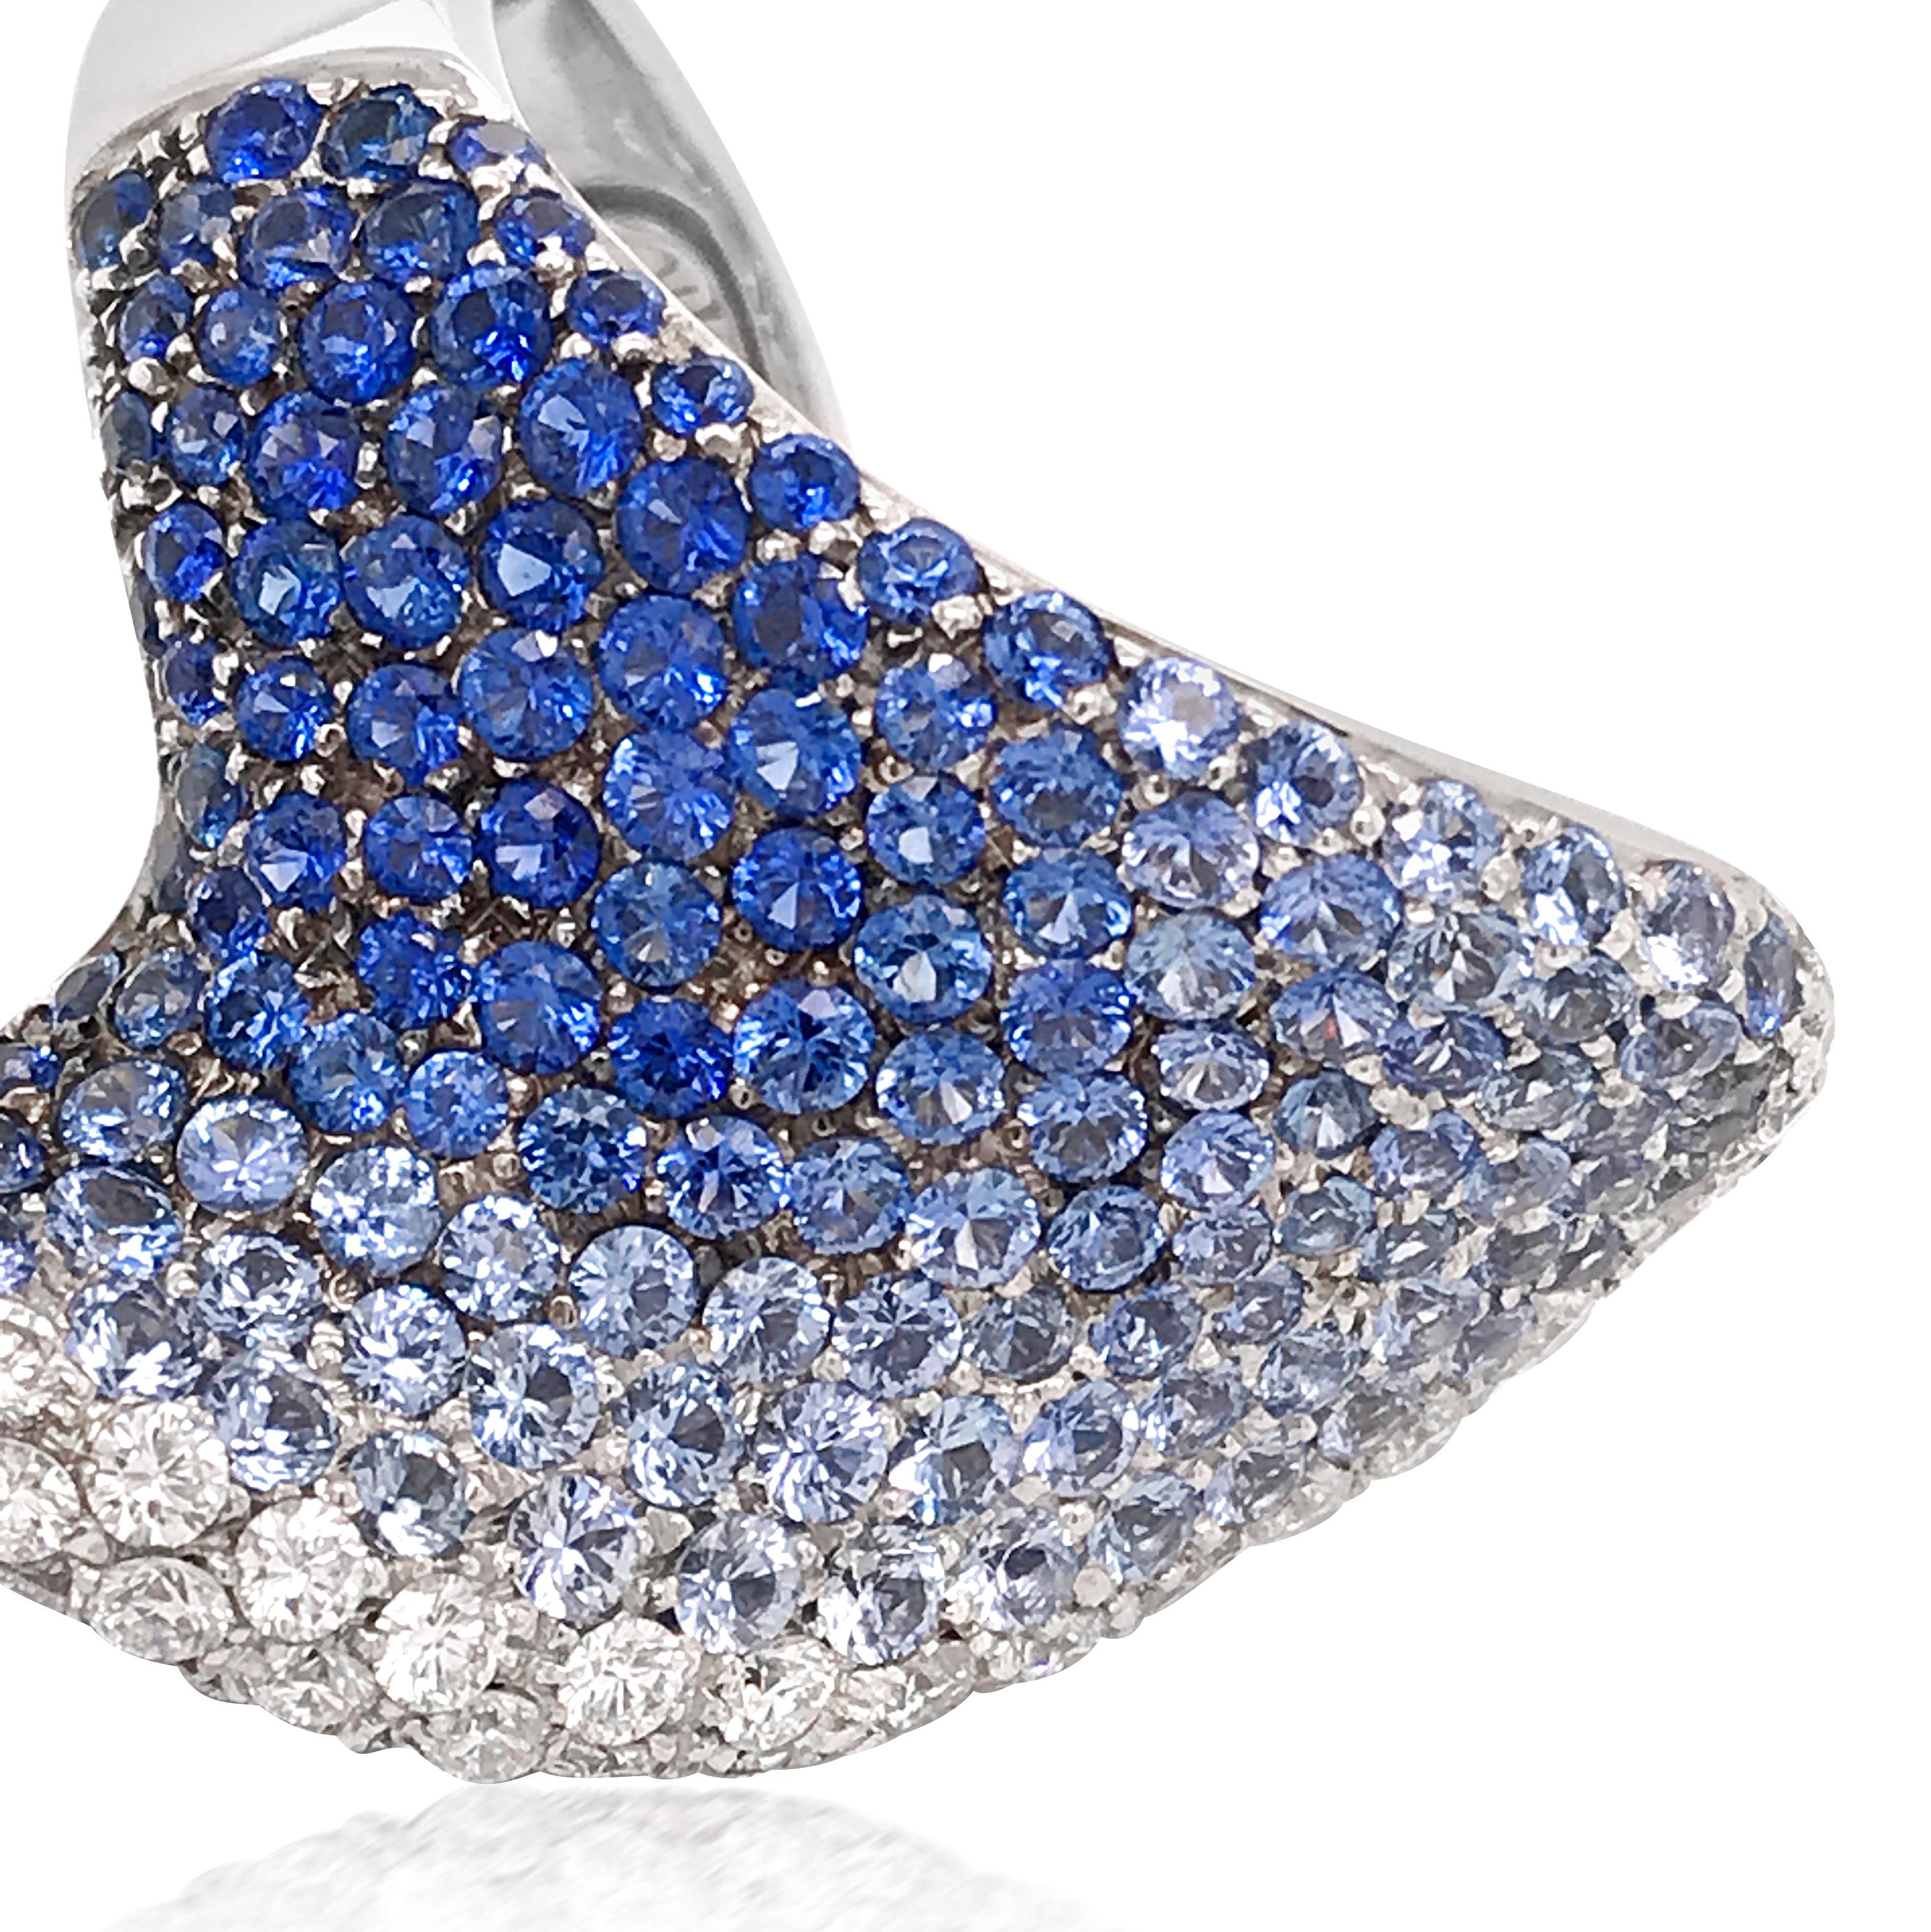 This stylish ombre sapphire and diamond ring is crafted in 18K white gold, weighing 23.50 grams and measuring 43*24mm. It is perfectly designed as the 7.45-carat sapphires and 2.0-carat diamonds are set by their colors. The sapphires are graduated